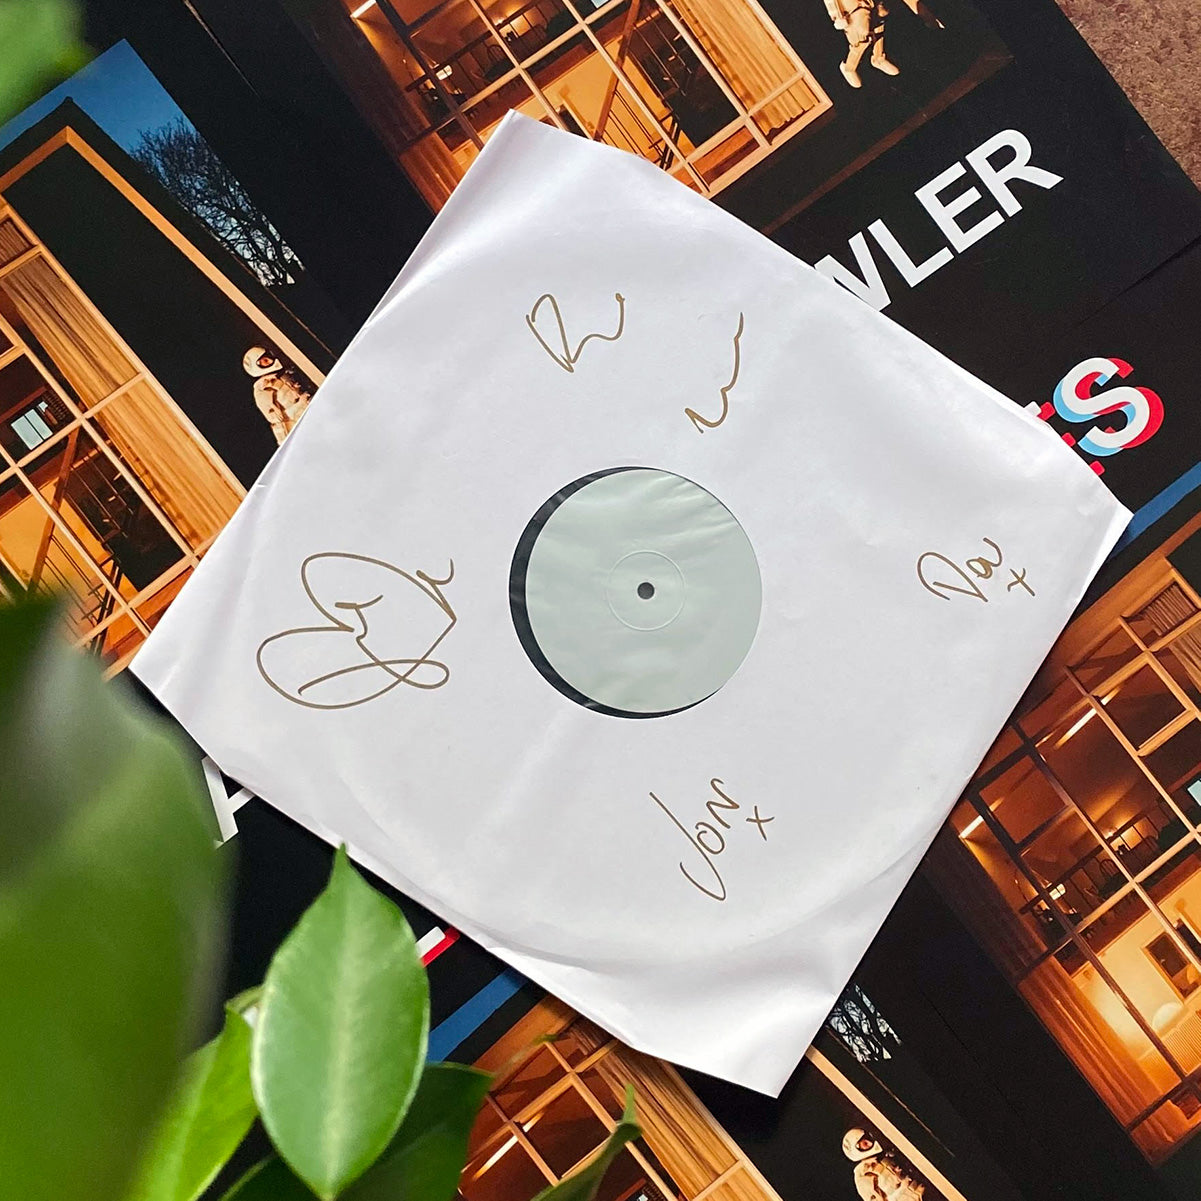 WIN | Signed IDLES test press + banner